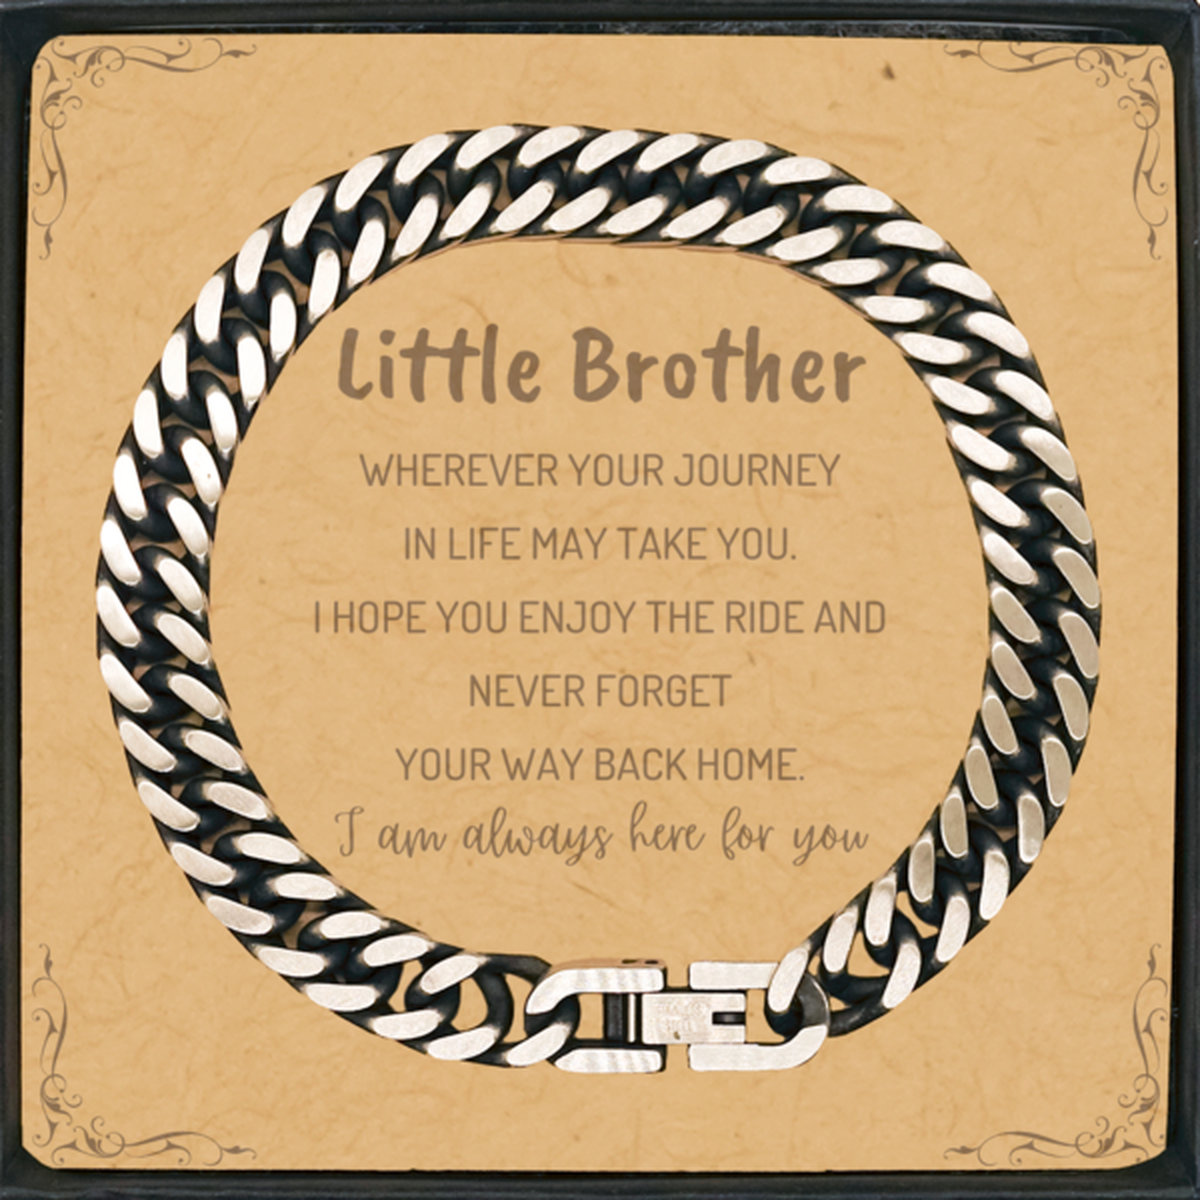 Little Brother wherever your journey in life may take you, I am always here for you Little Brother Cuban Link Chain Bracelet, Awesome Christmas Gifts For Little Brother Message Card, Little Brother Birthday Gifts for Men Women Family Loved One